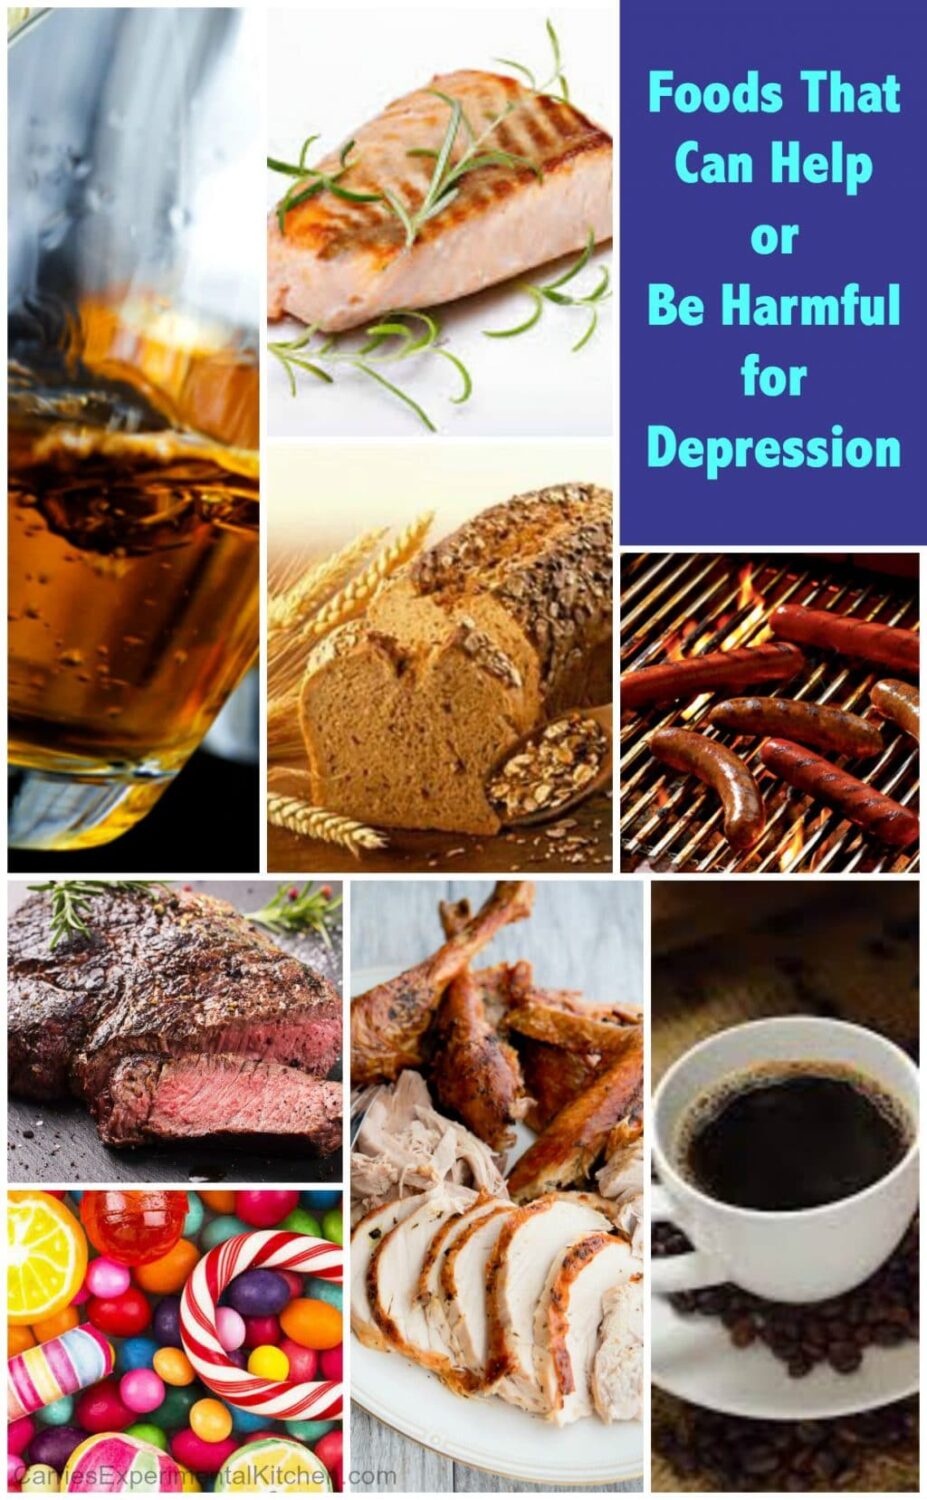 Foods That Can Help or Be Harmful for Depression | CarriesExperimentalKitchen.com National Suicide Prevention Week September 5-11, 2015